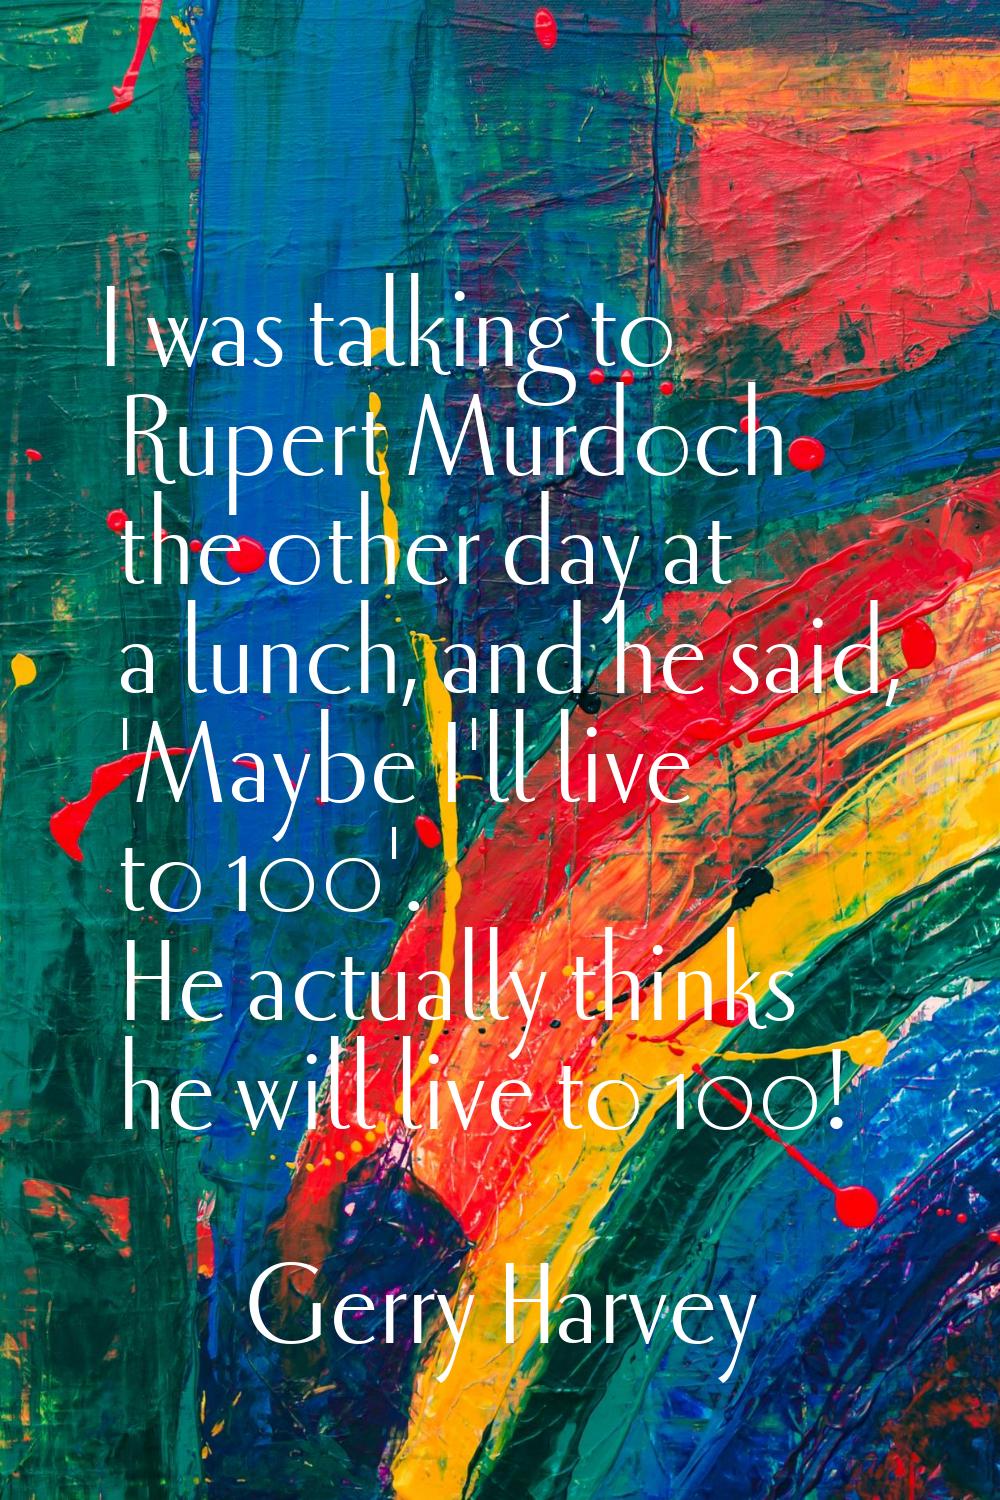 I was talking to Rupert Murdoch the other day at a lunch, and he said, 'Maybe I'll live to 100'. He